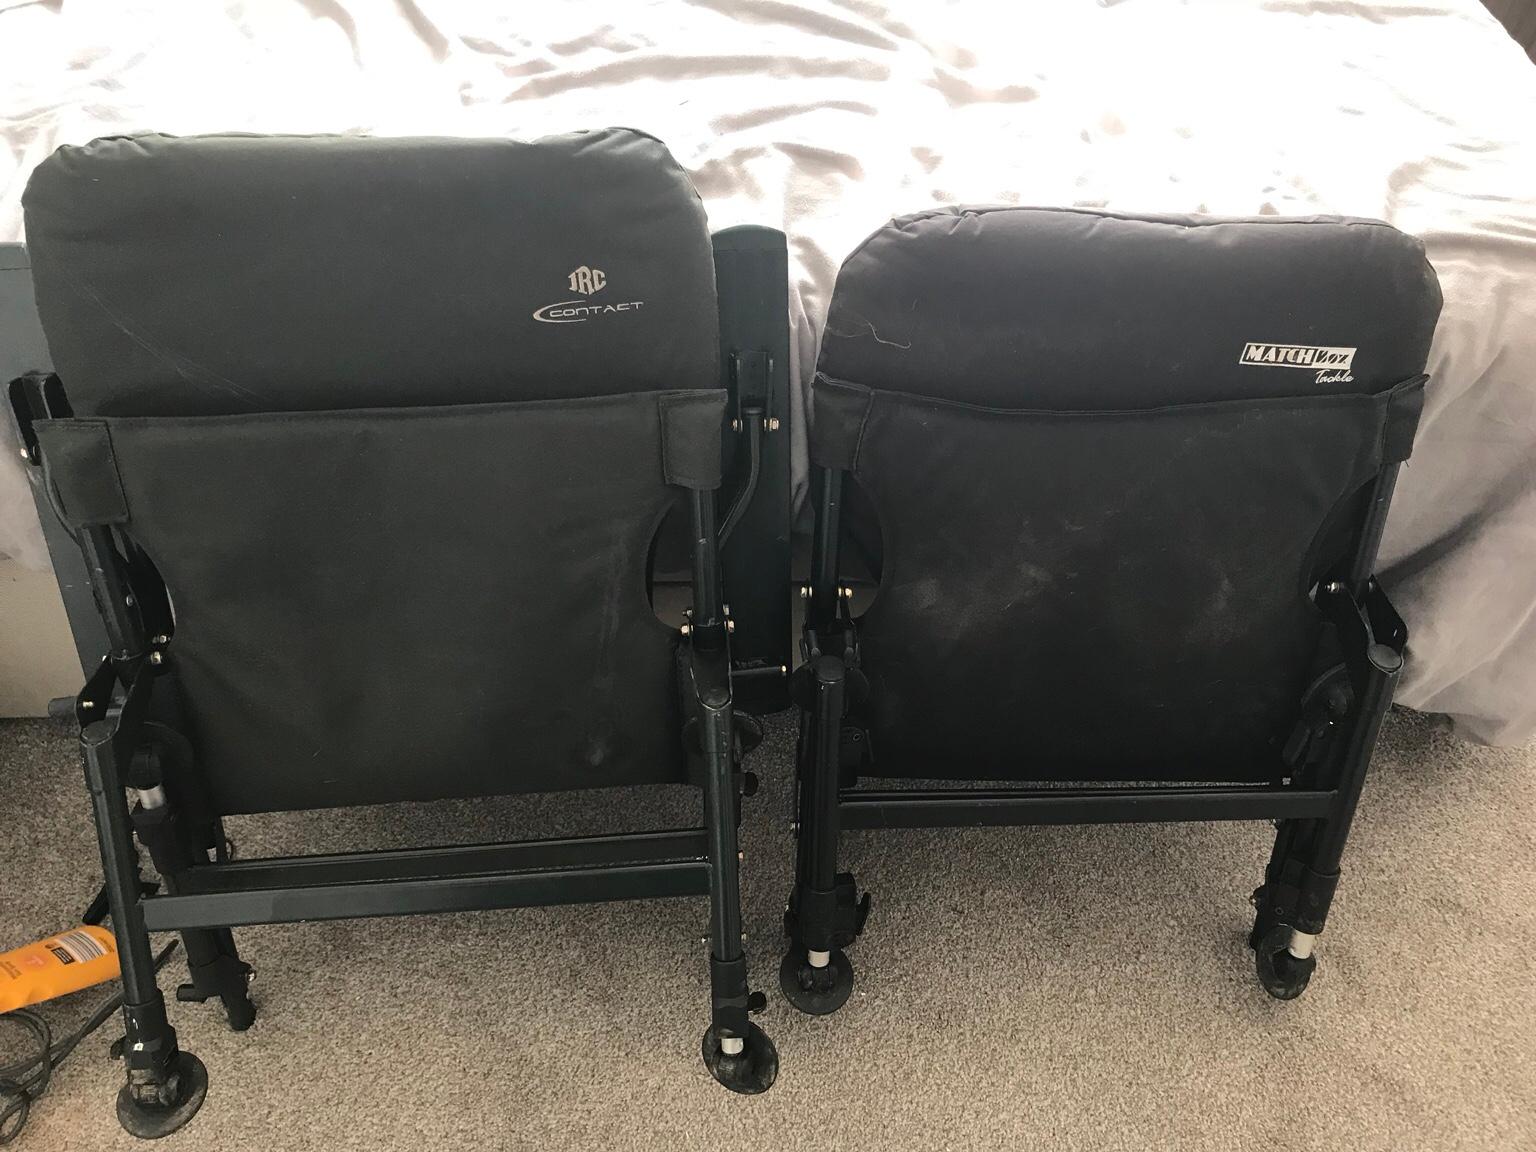 Carp Fishing Chairs 25 Each In Ws10 Walsall For 25 00 For Sale